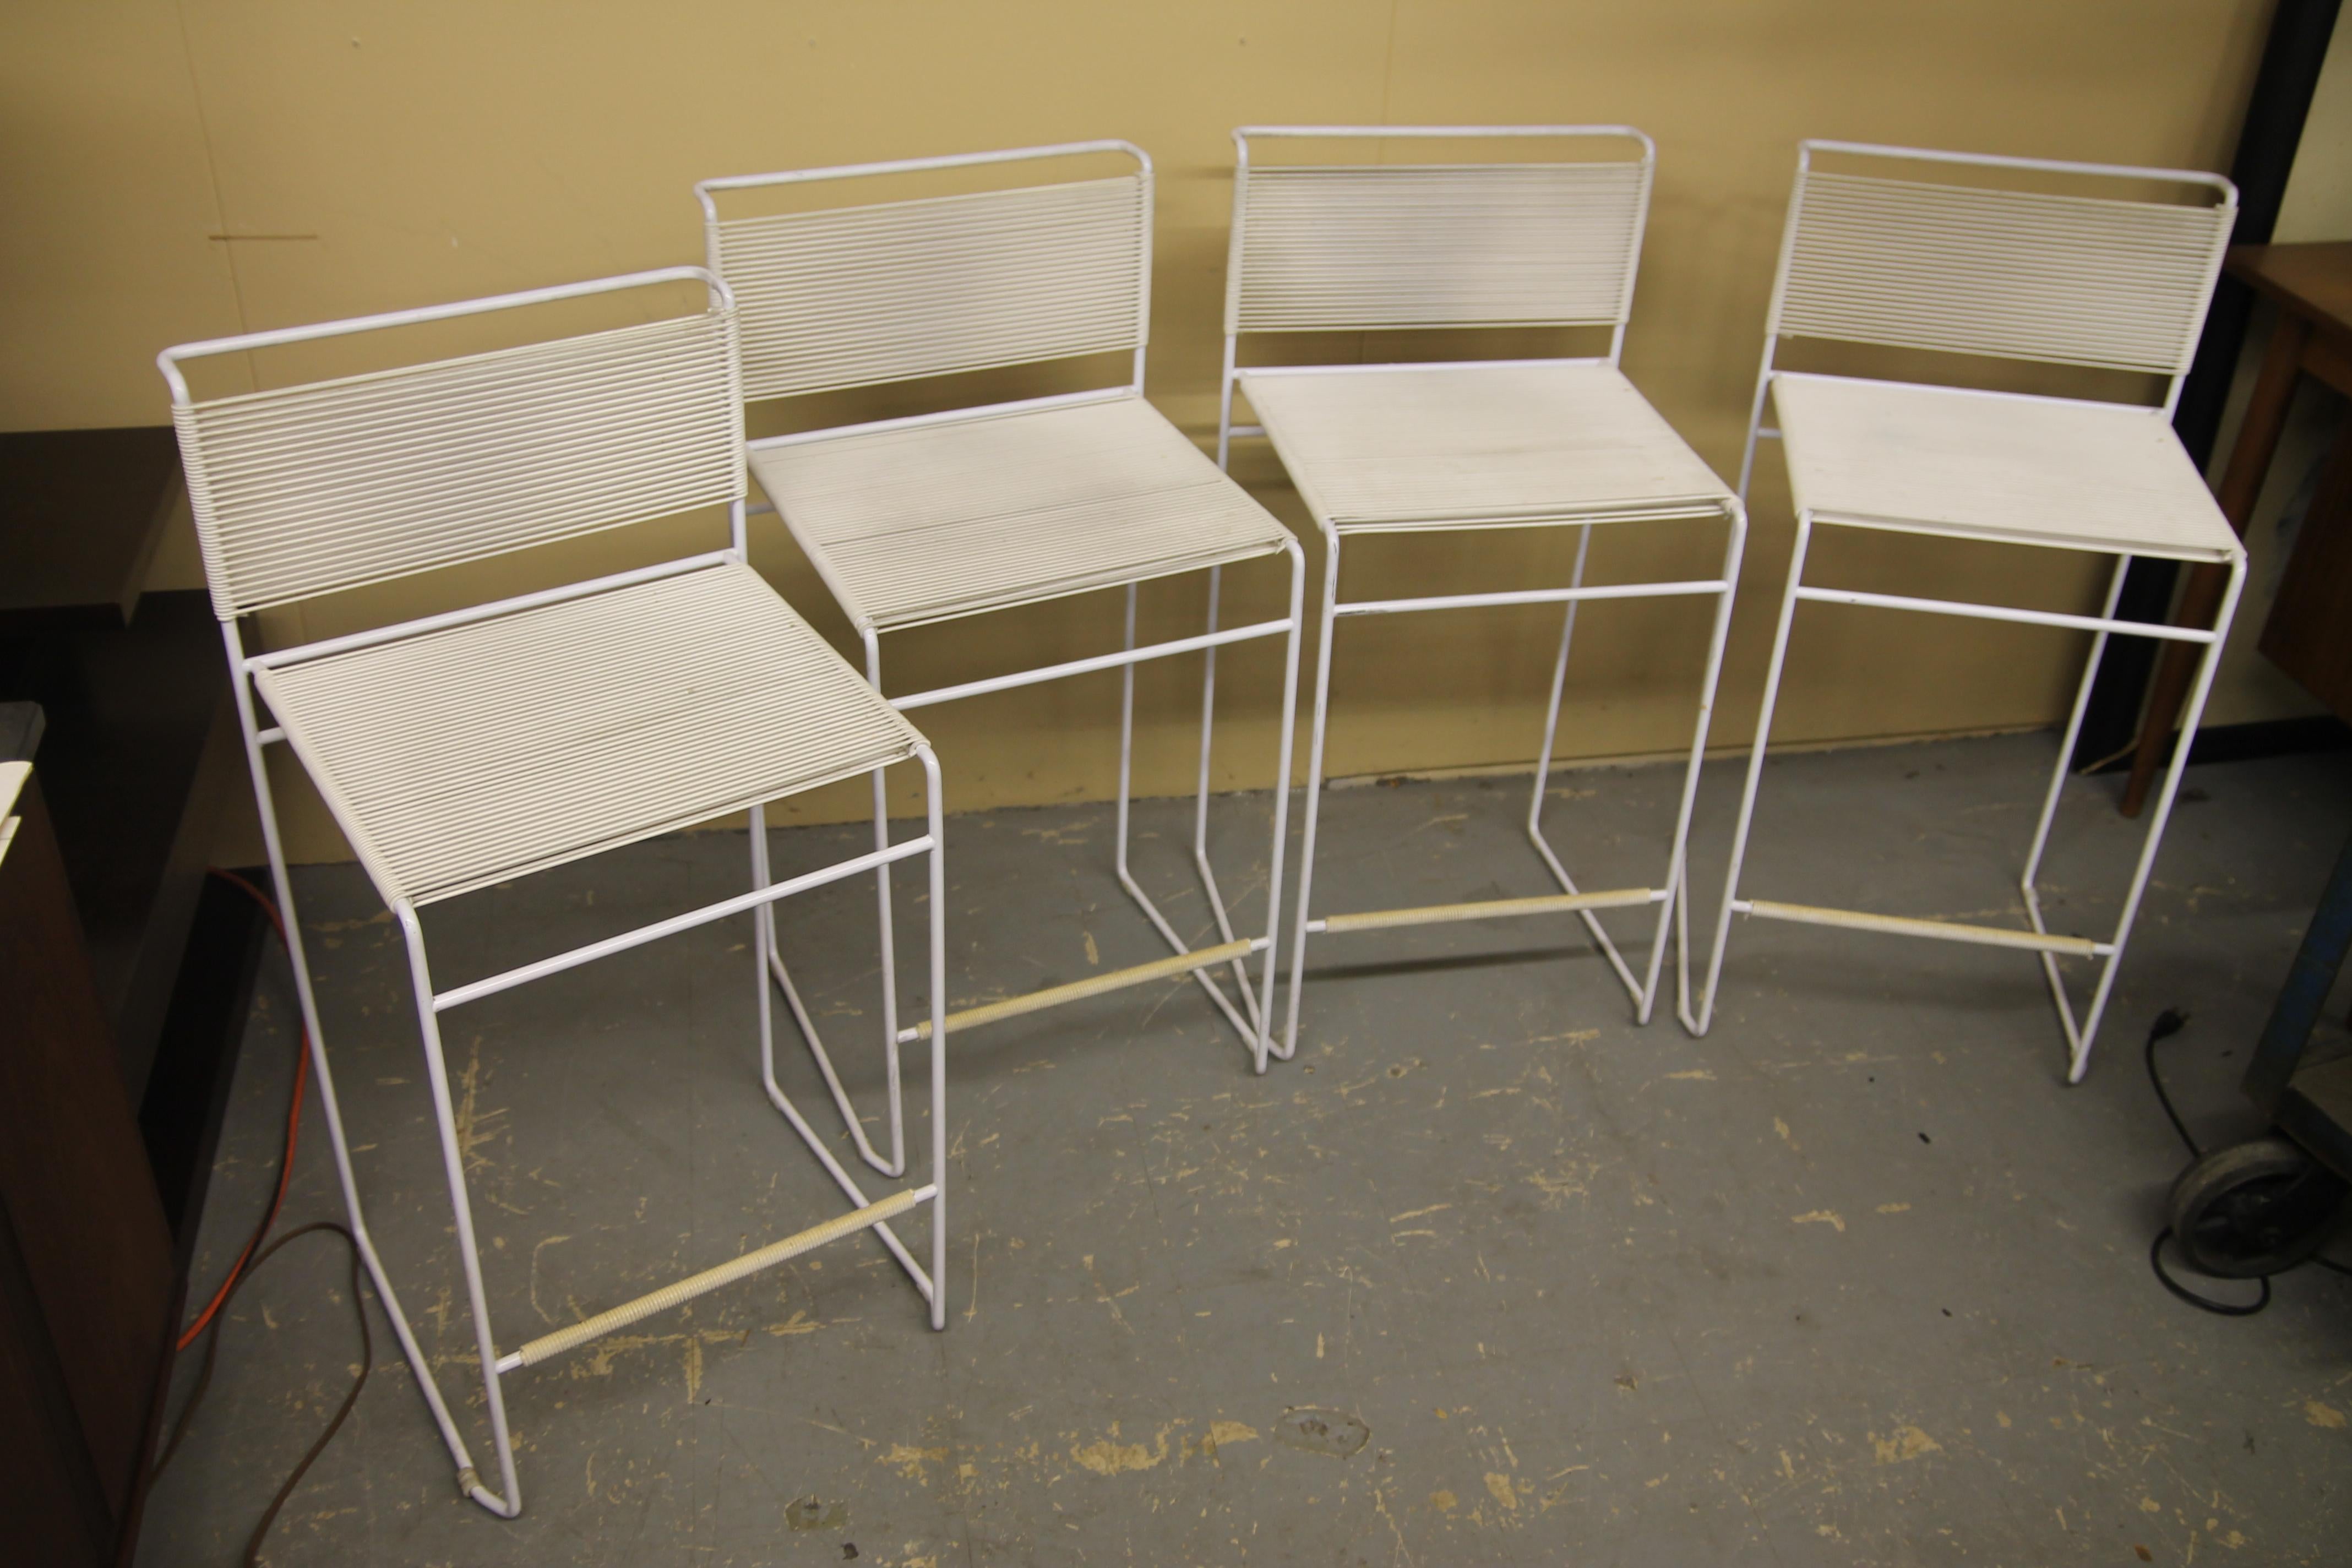 Set of 4 white fly line stools designed by Giandomenico Belotti. The stools are very comfortable and are stackable as well.